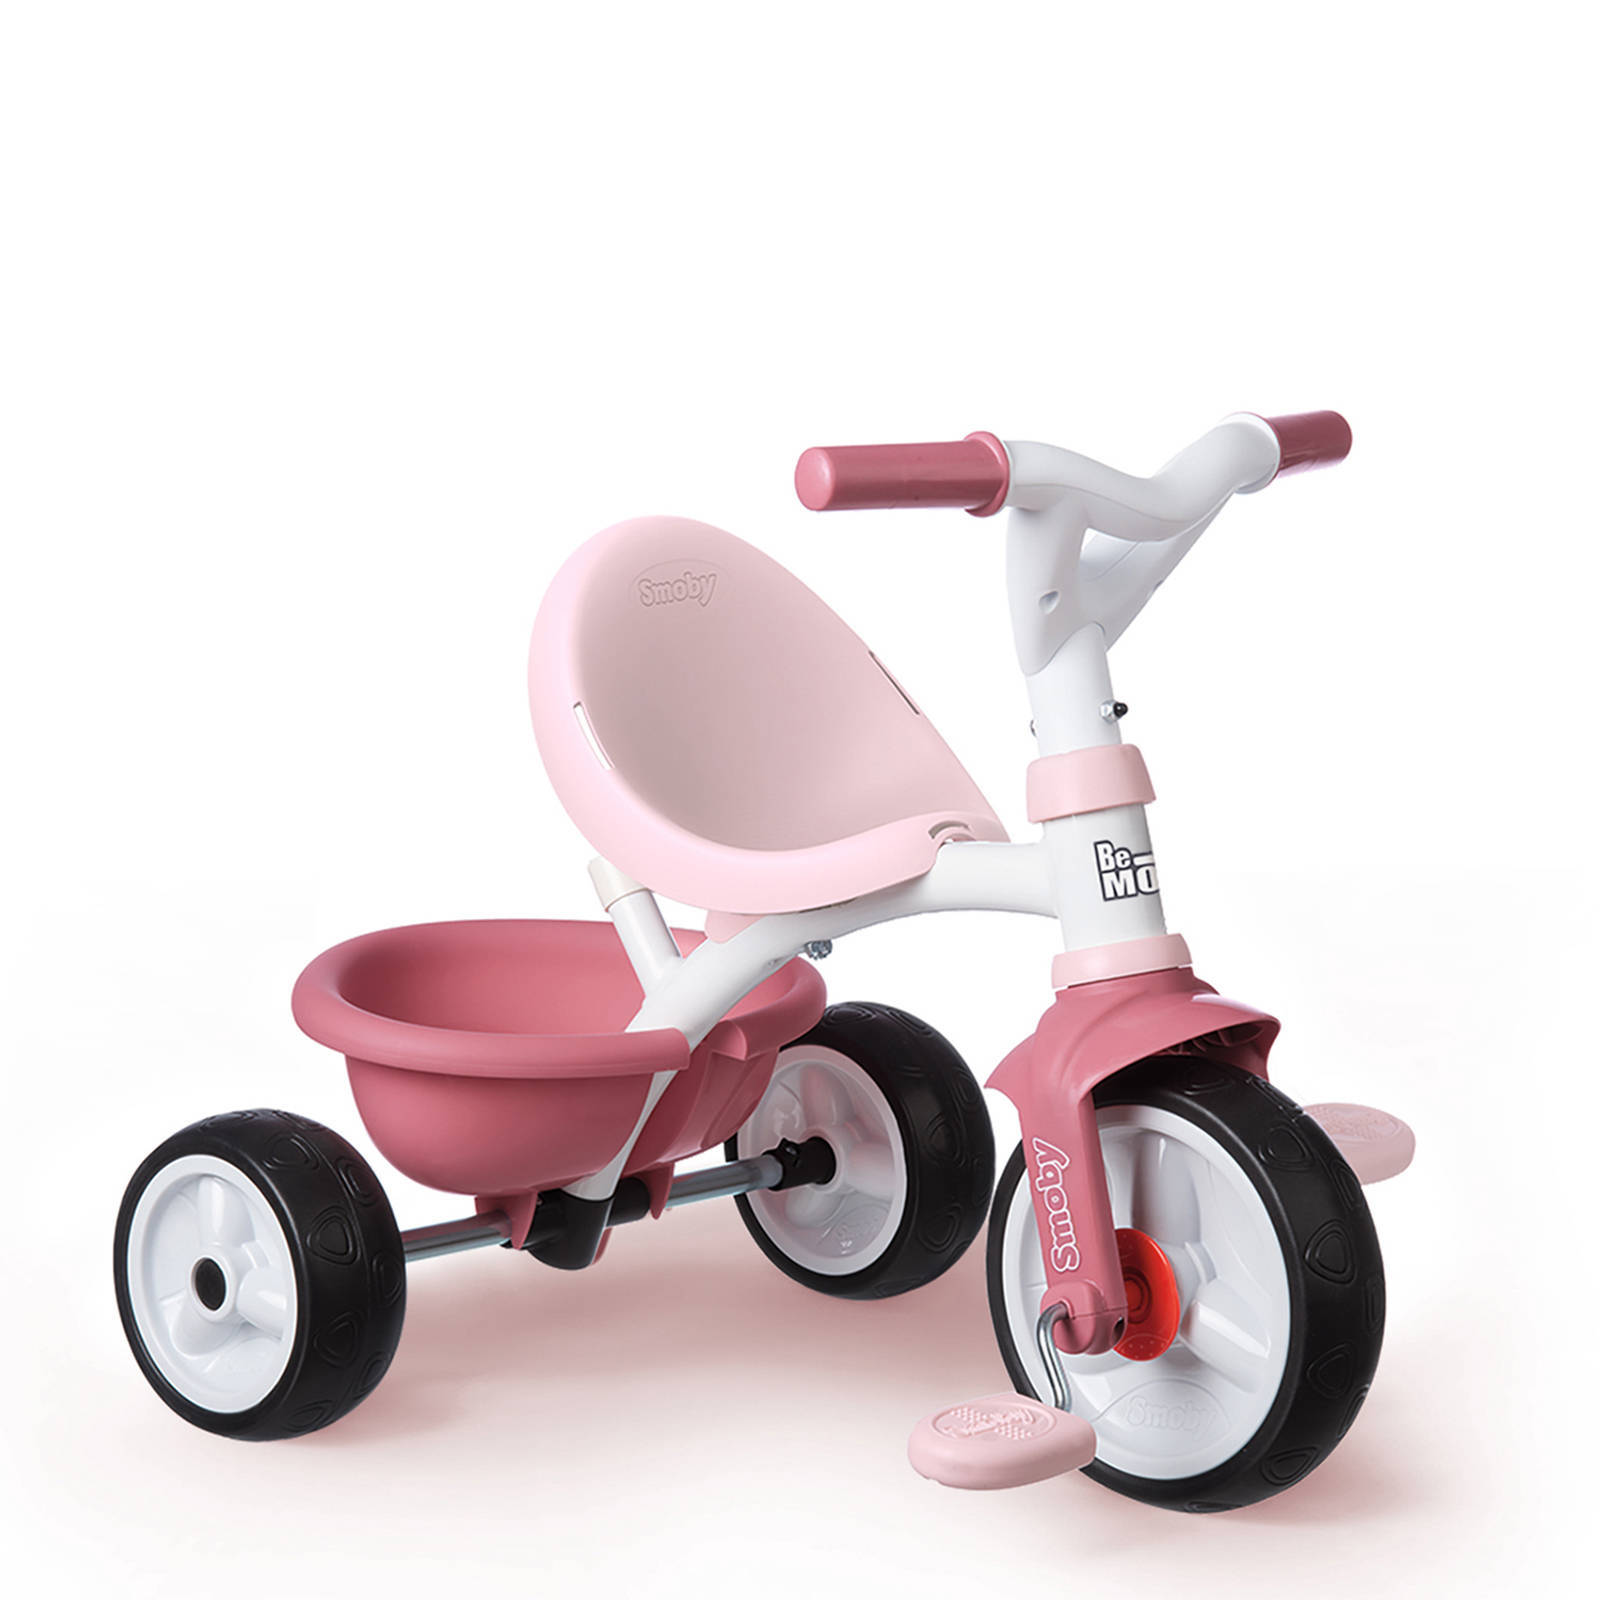 Smoby Babydriewieler Be Move 2 in 1 roze online kopen